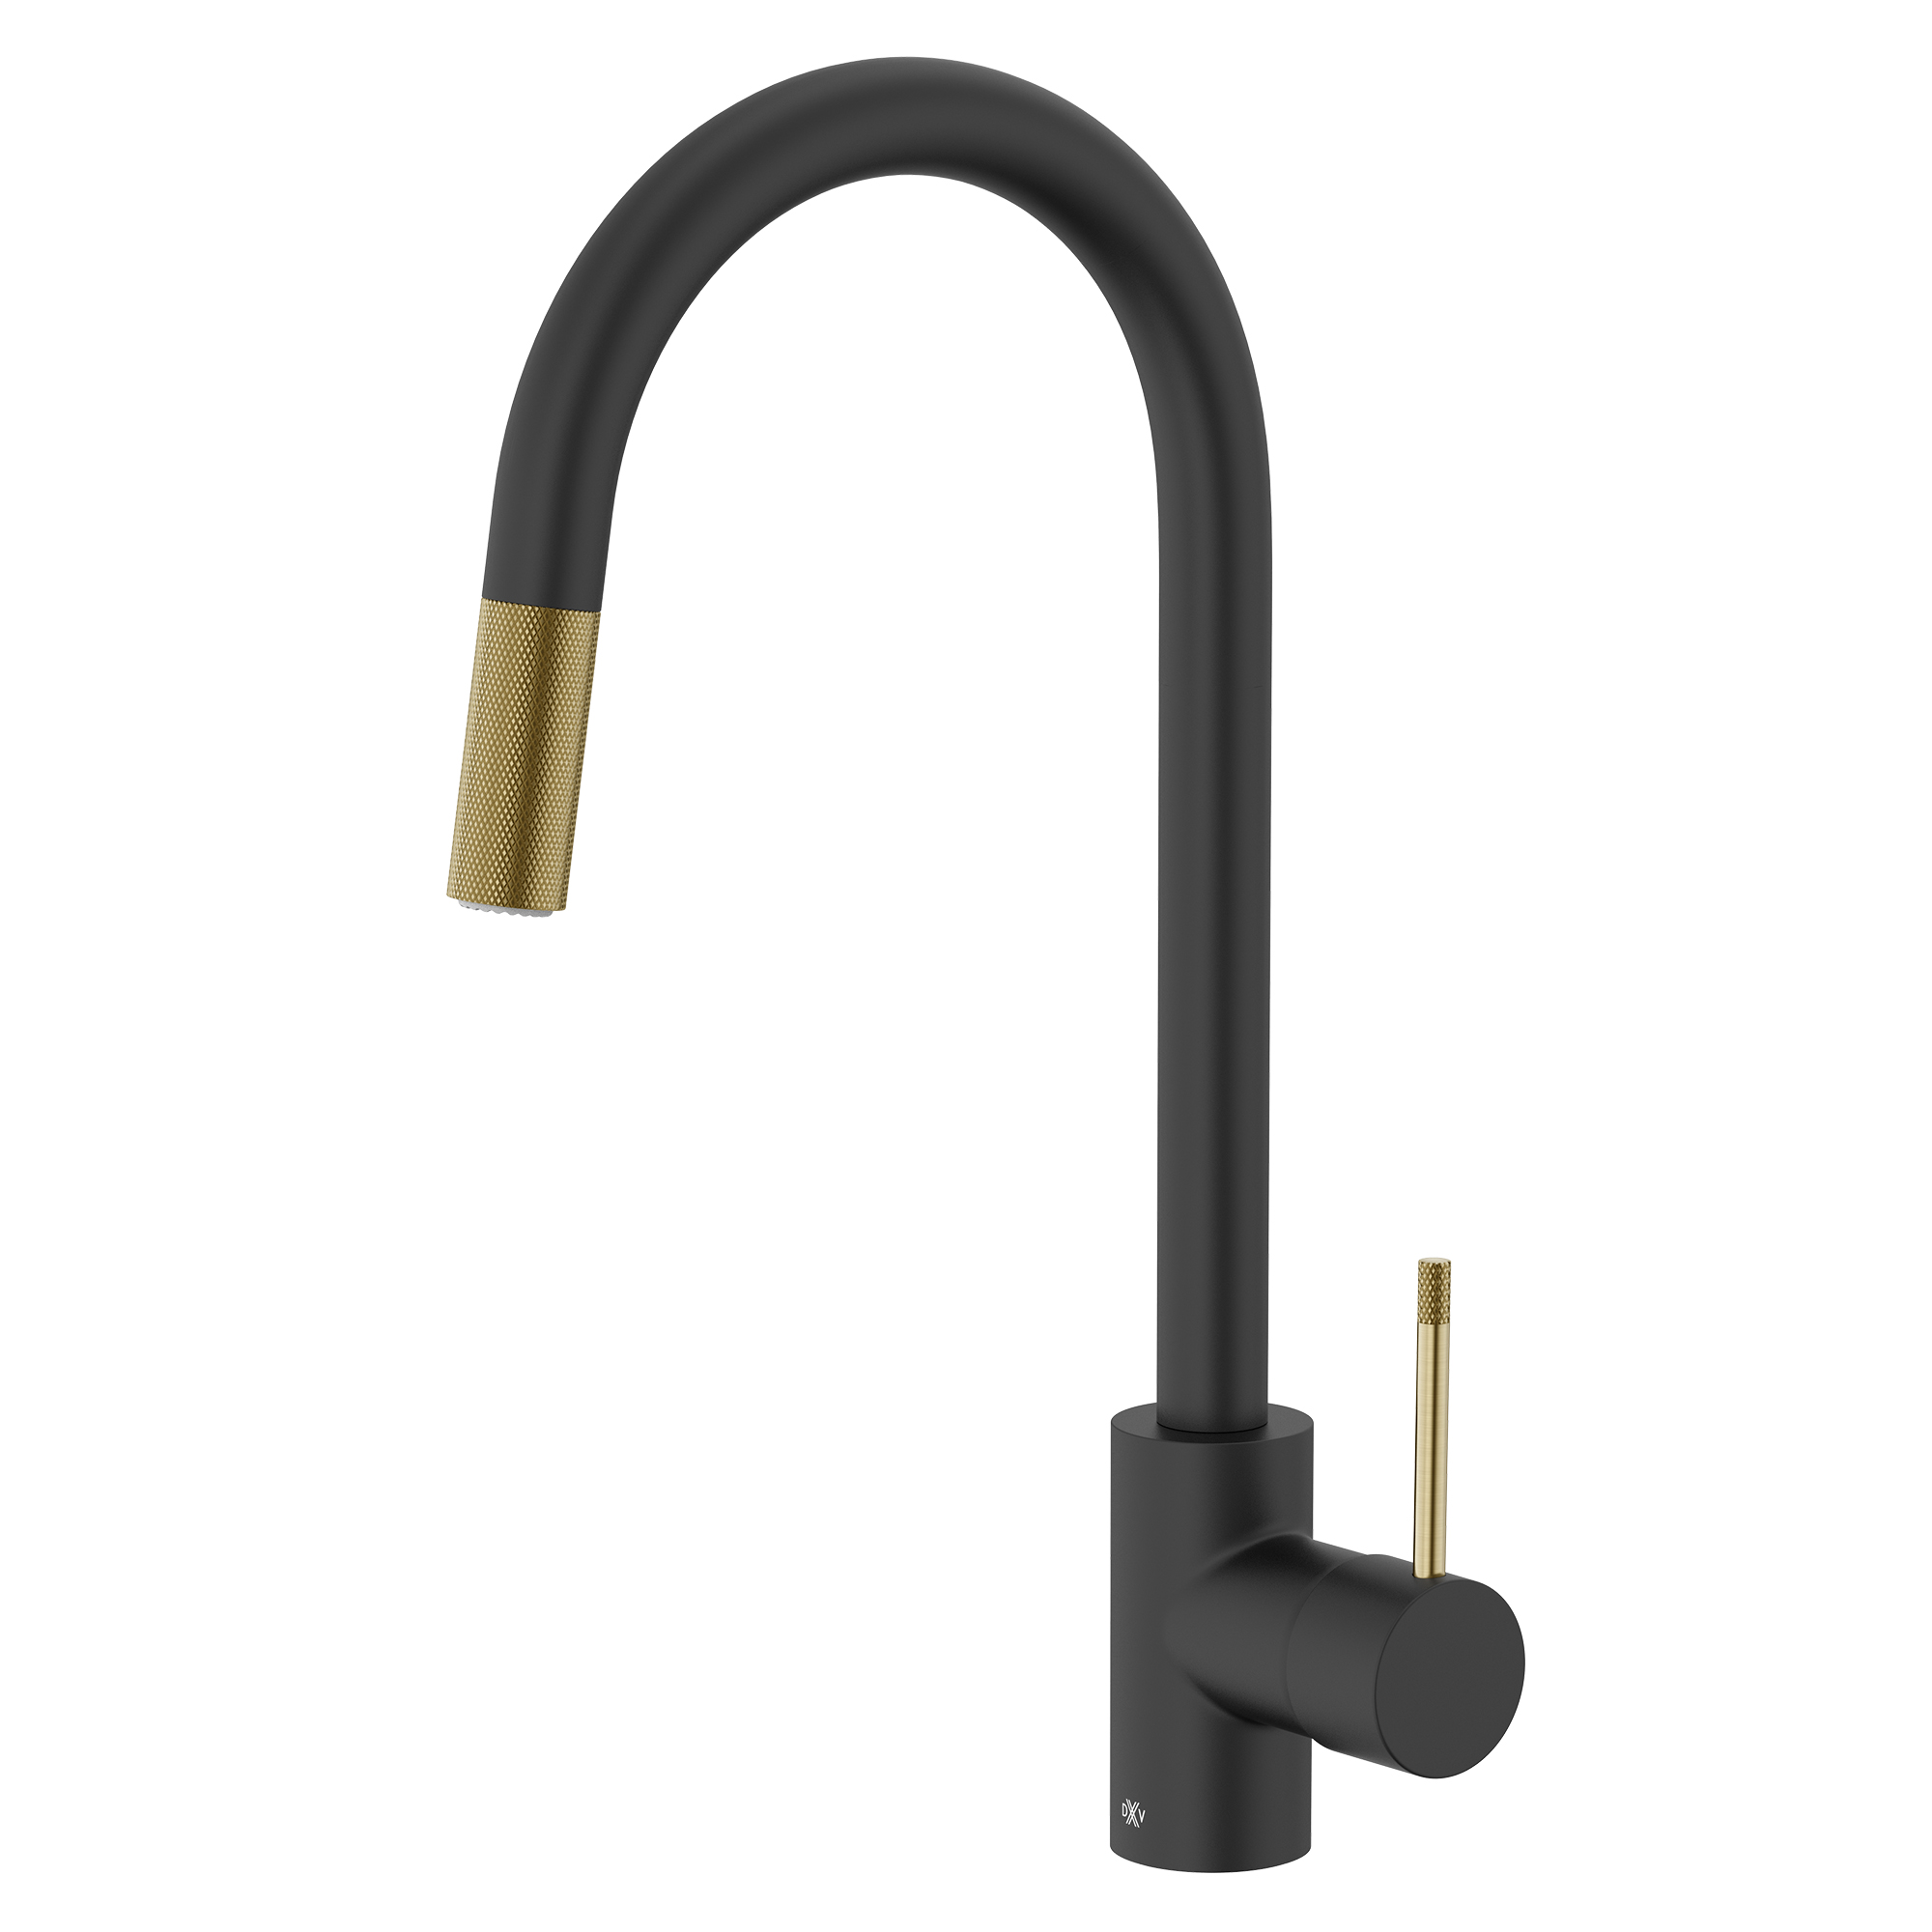 Etre Single Handle Pull-Down Kitchen Faucet with Lever Handle